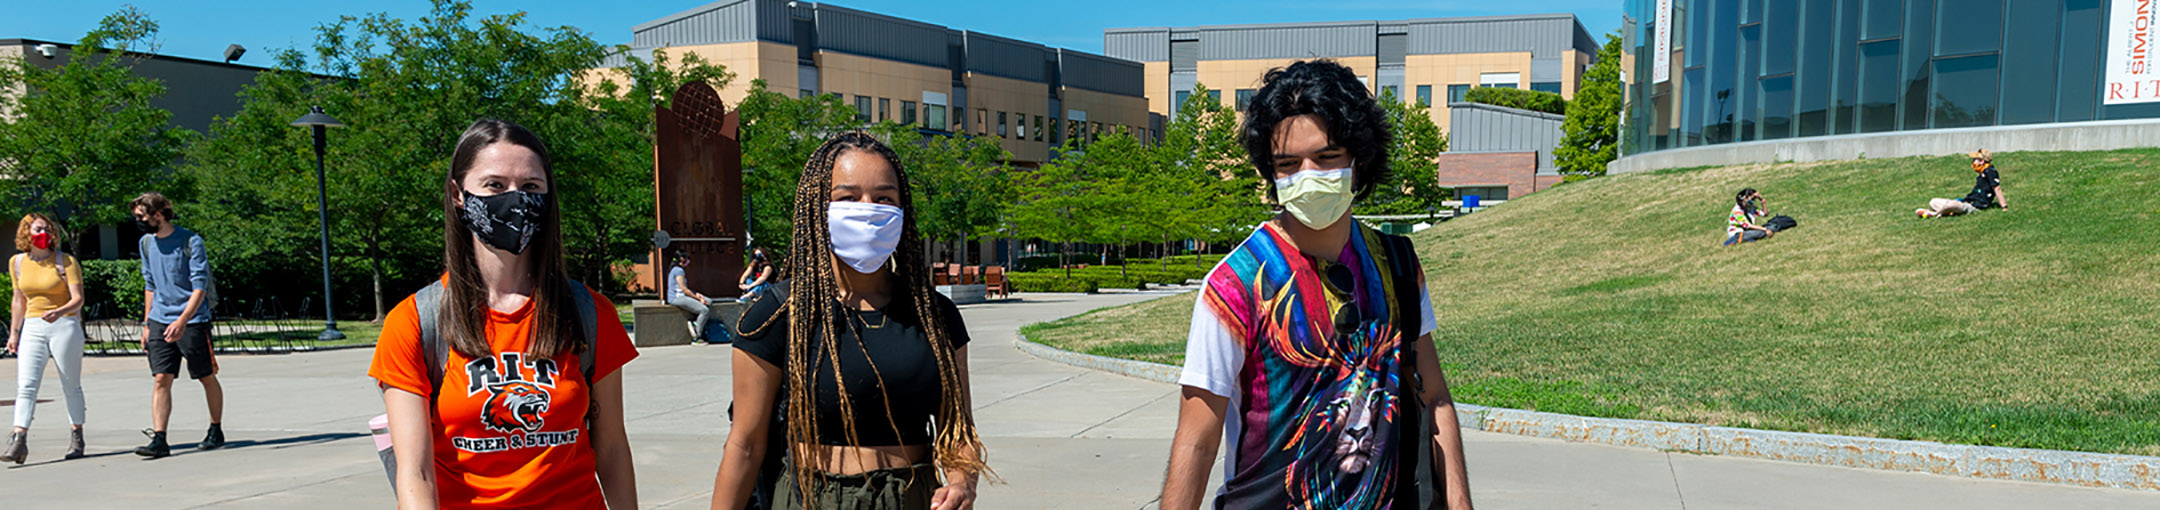 three students walk near Fountain Park on the RIT campus wearing masks